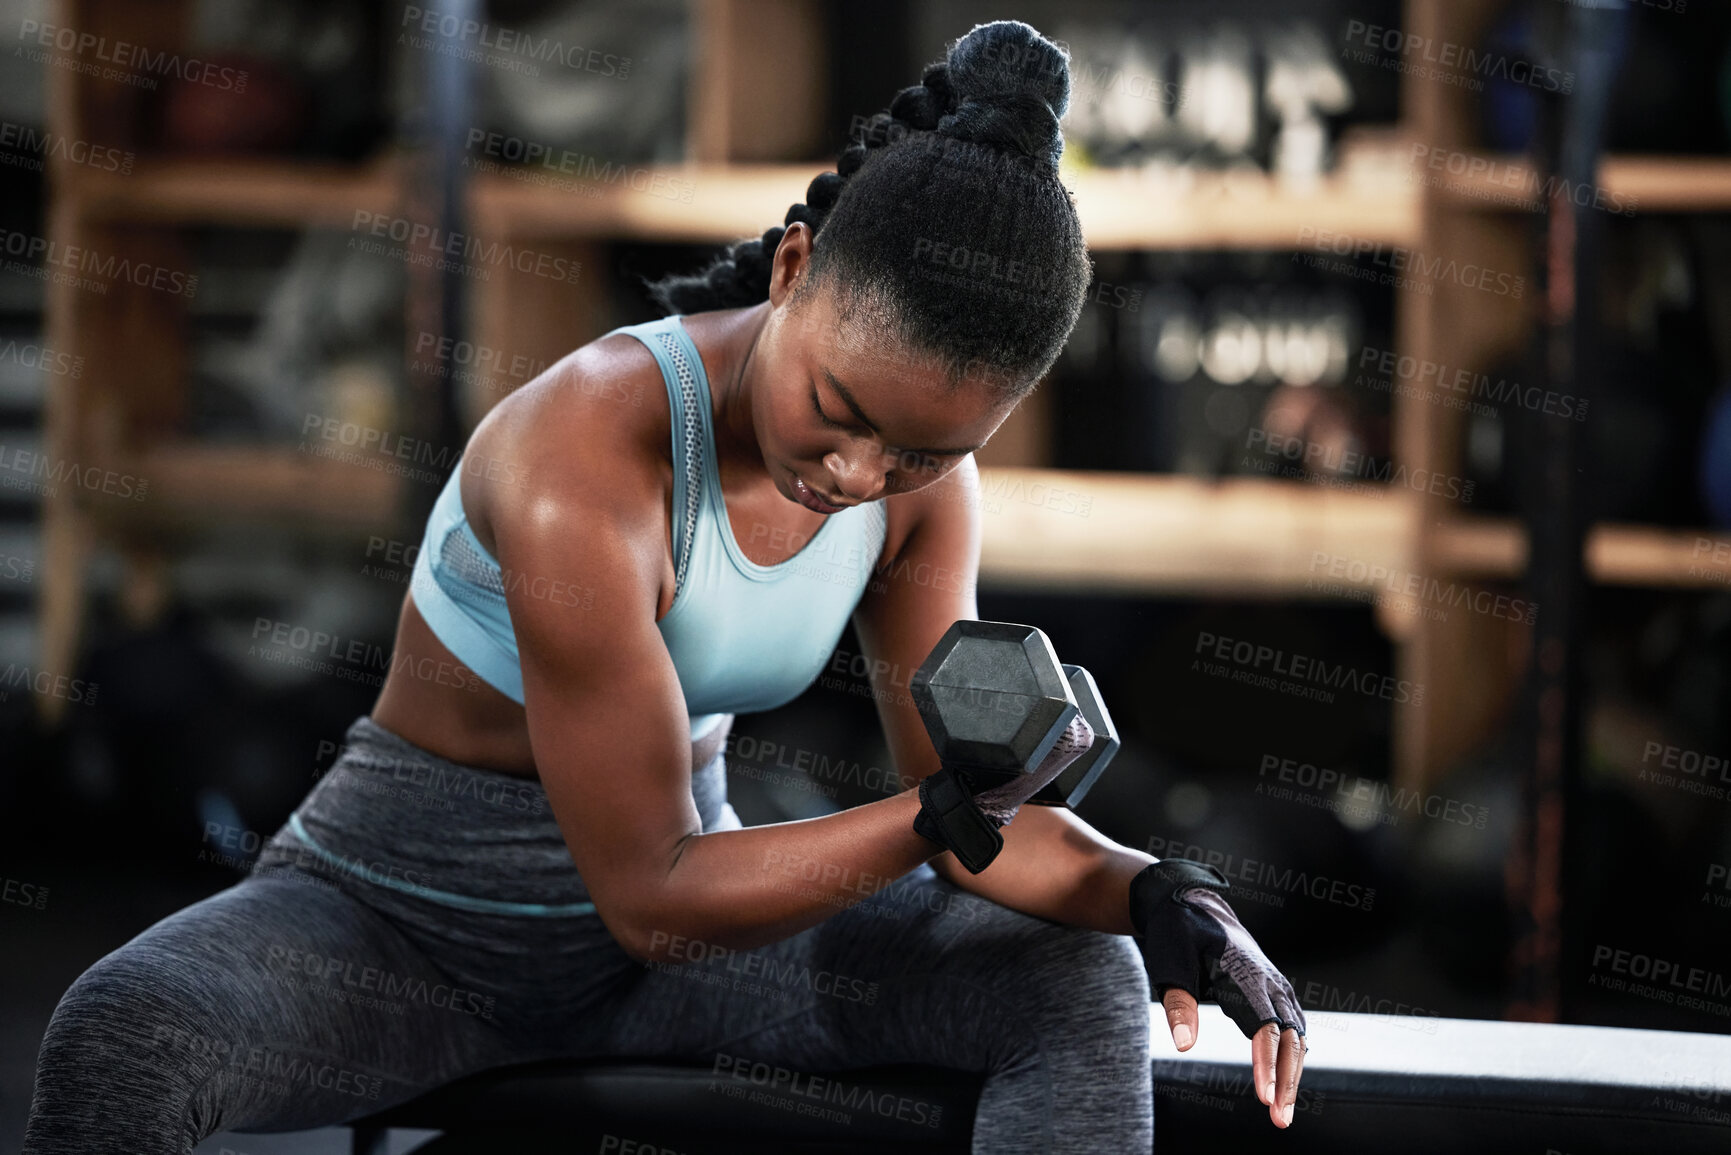 Buy stock photo Gym, dumbbell or strong girl training, exercise or workout for powerful arms or muscles for body fitness. Concentration curls, strength or African woman athlete lifting weights or exercising biceps 